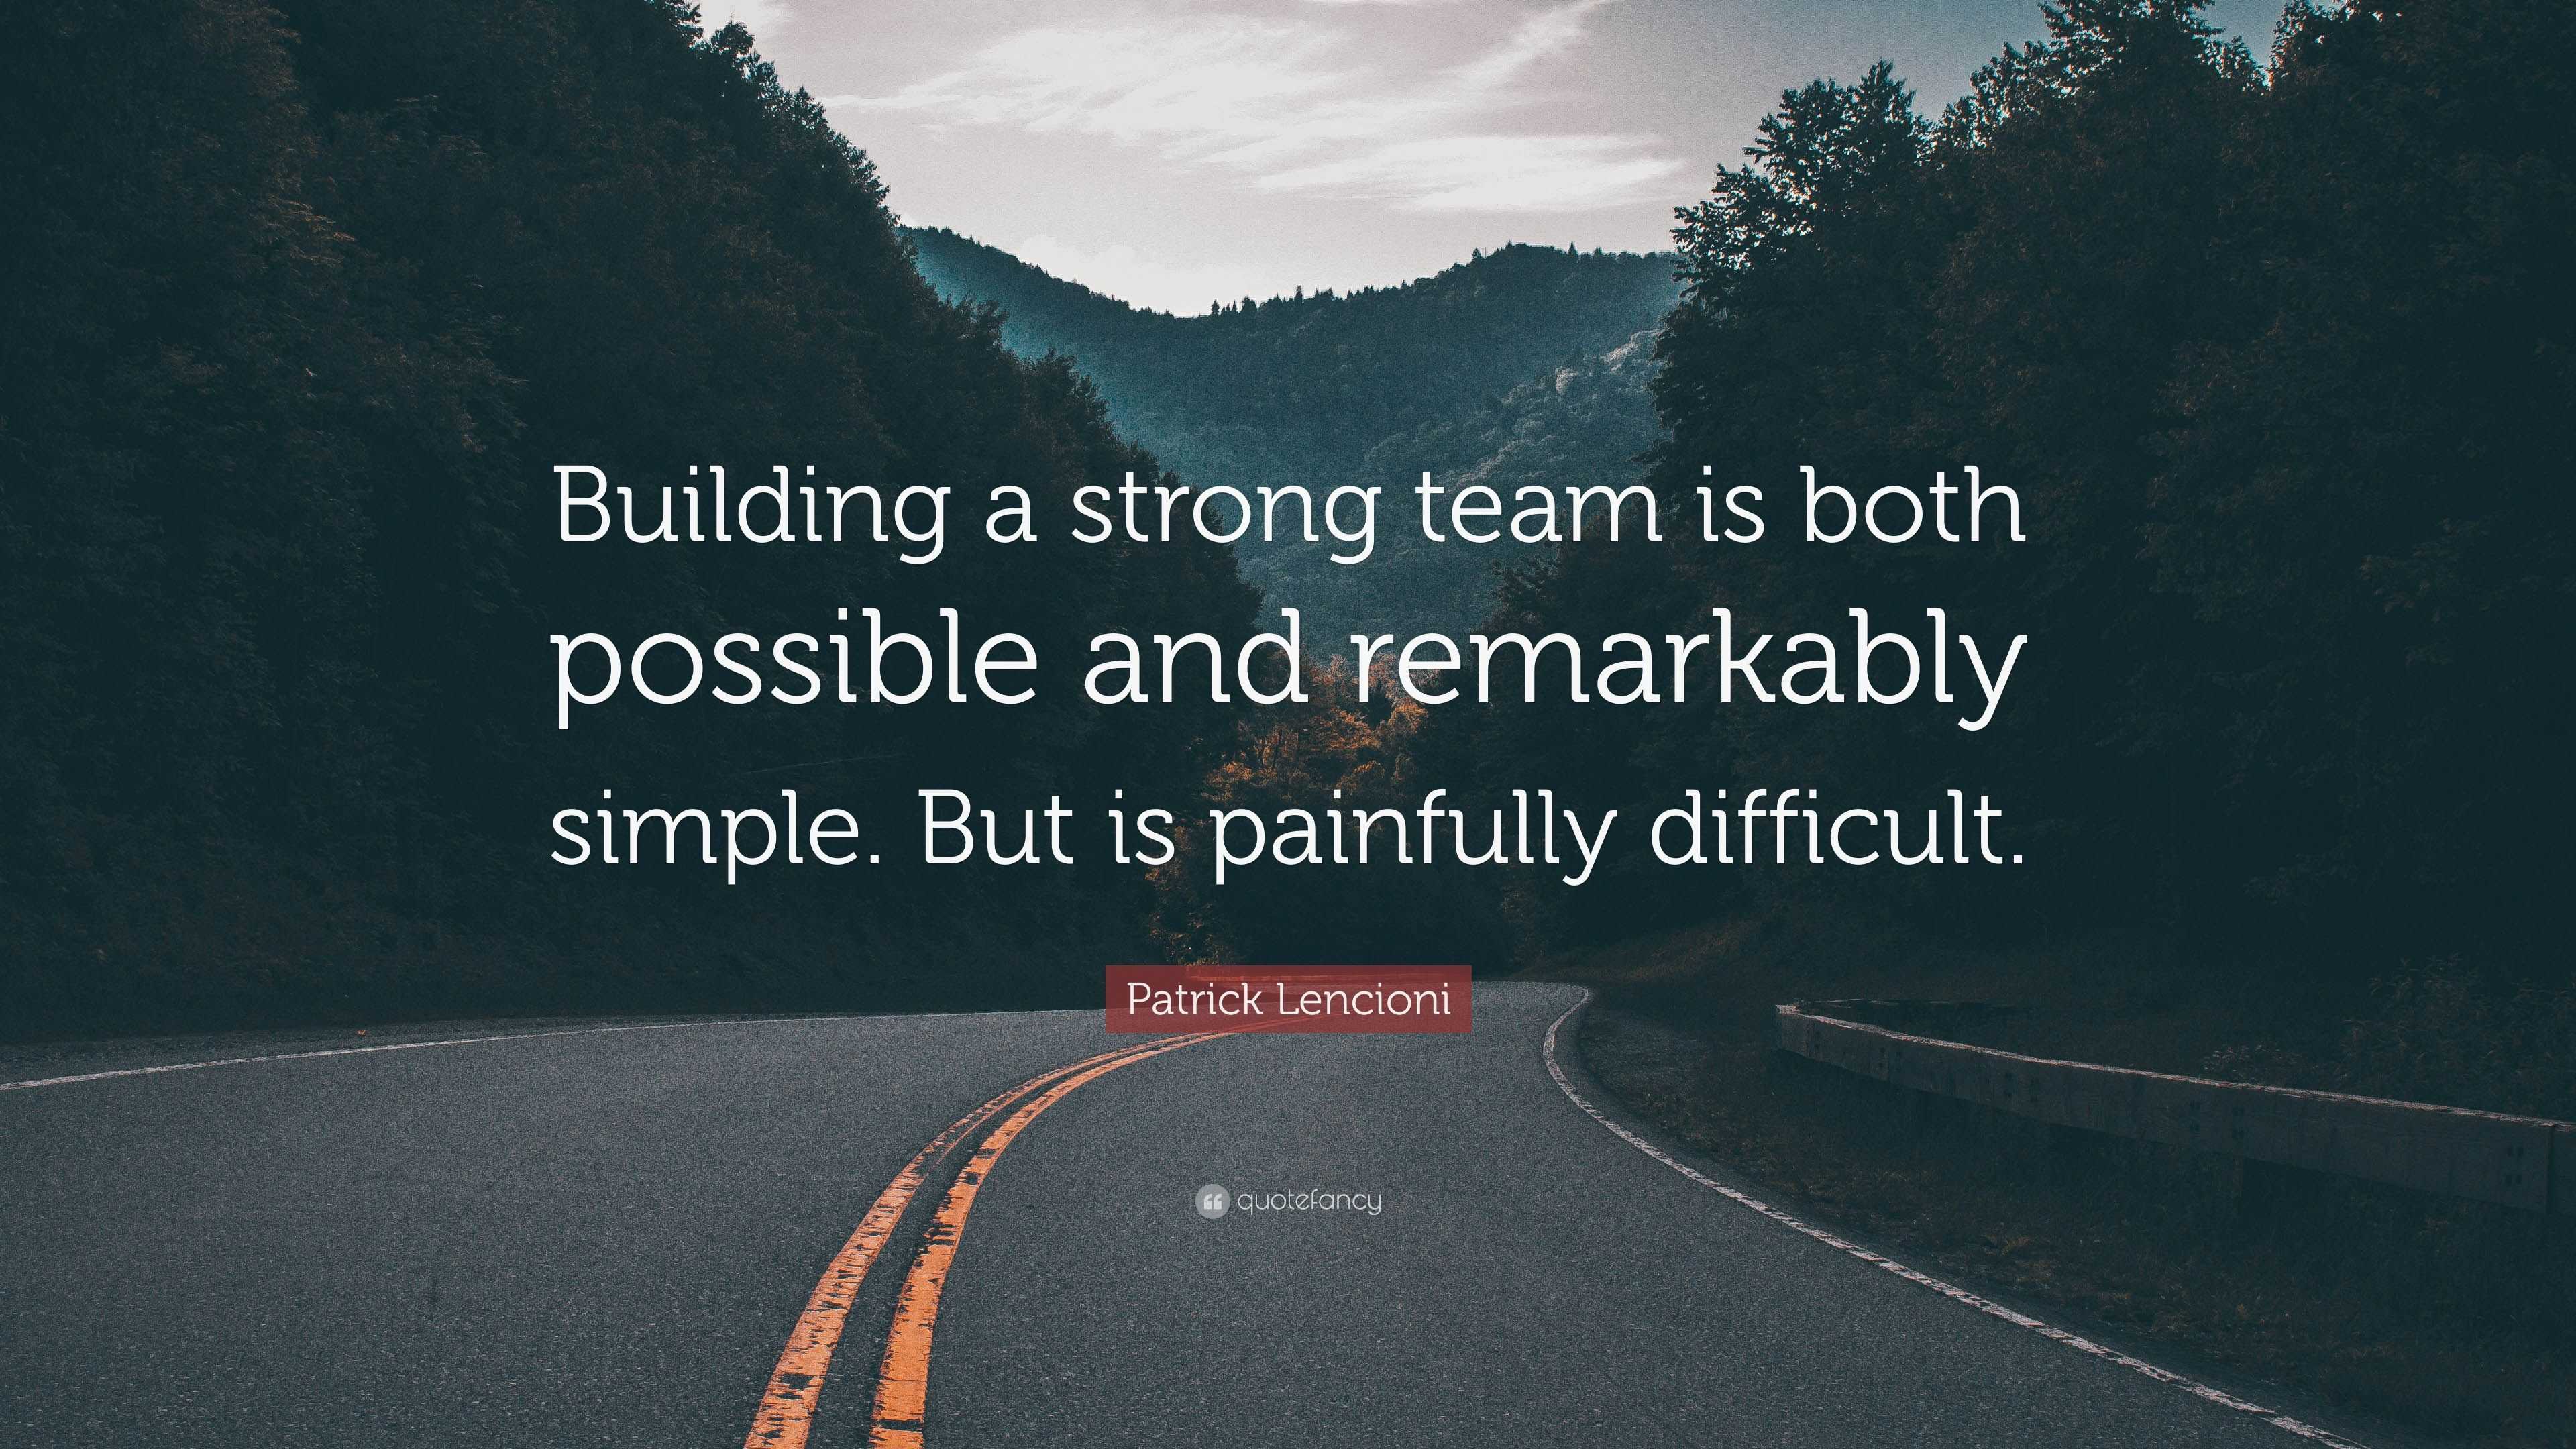 Patrick Lencioni Quote: “Building a strong team is both possible and